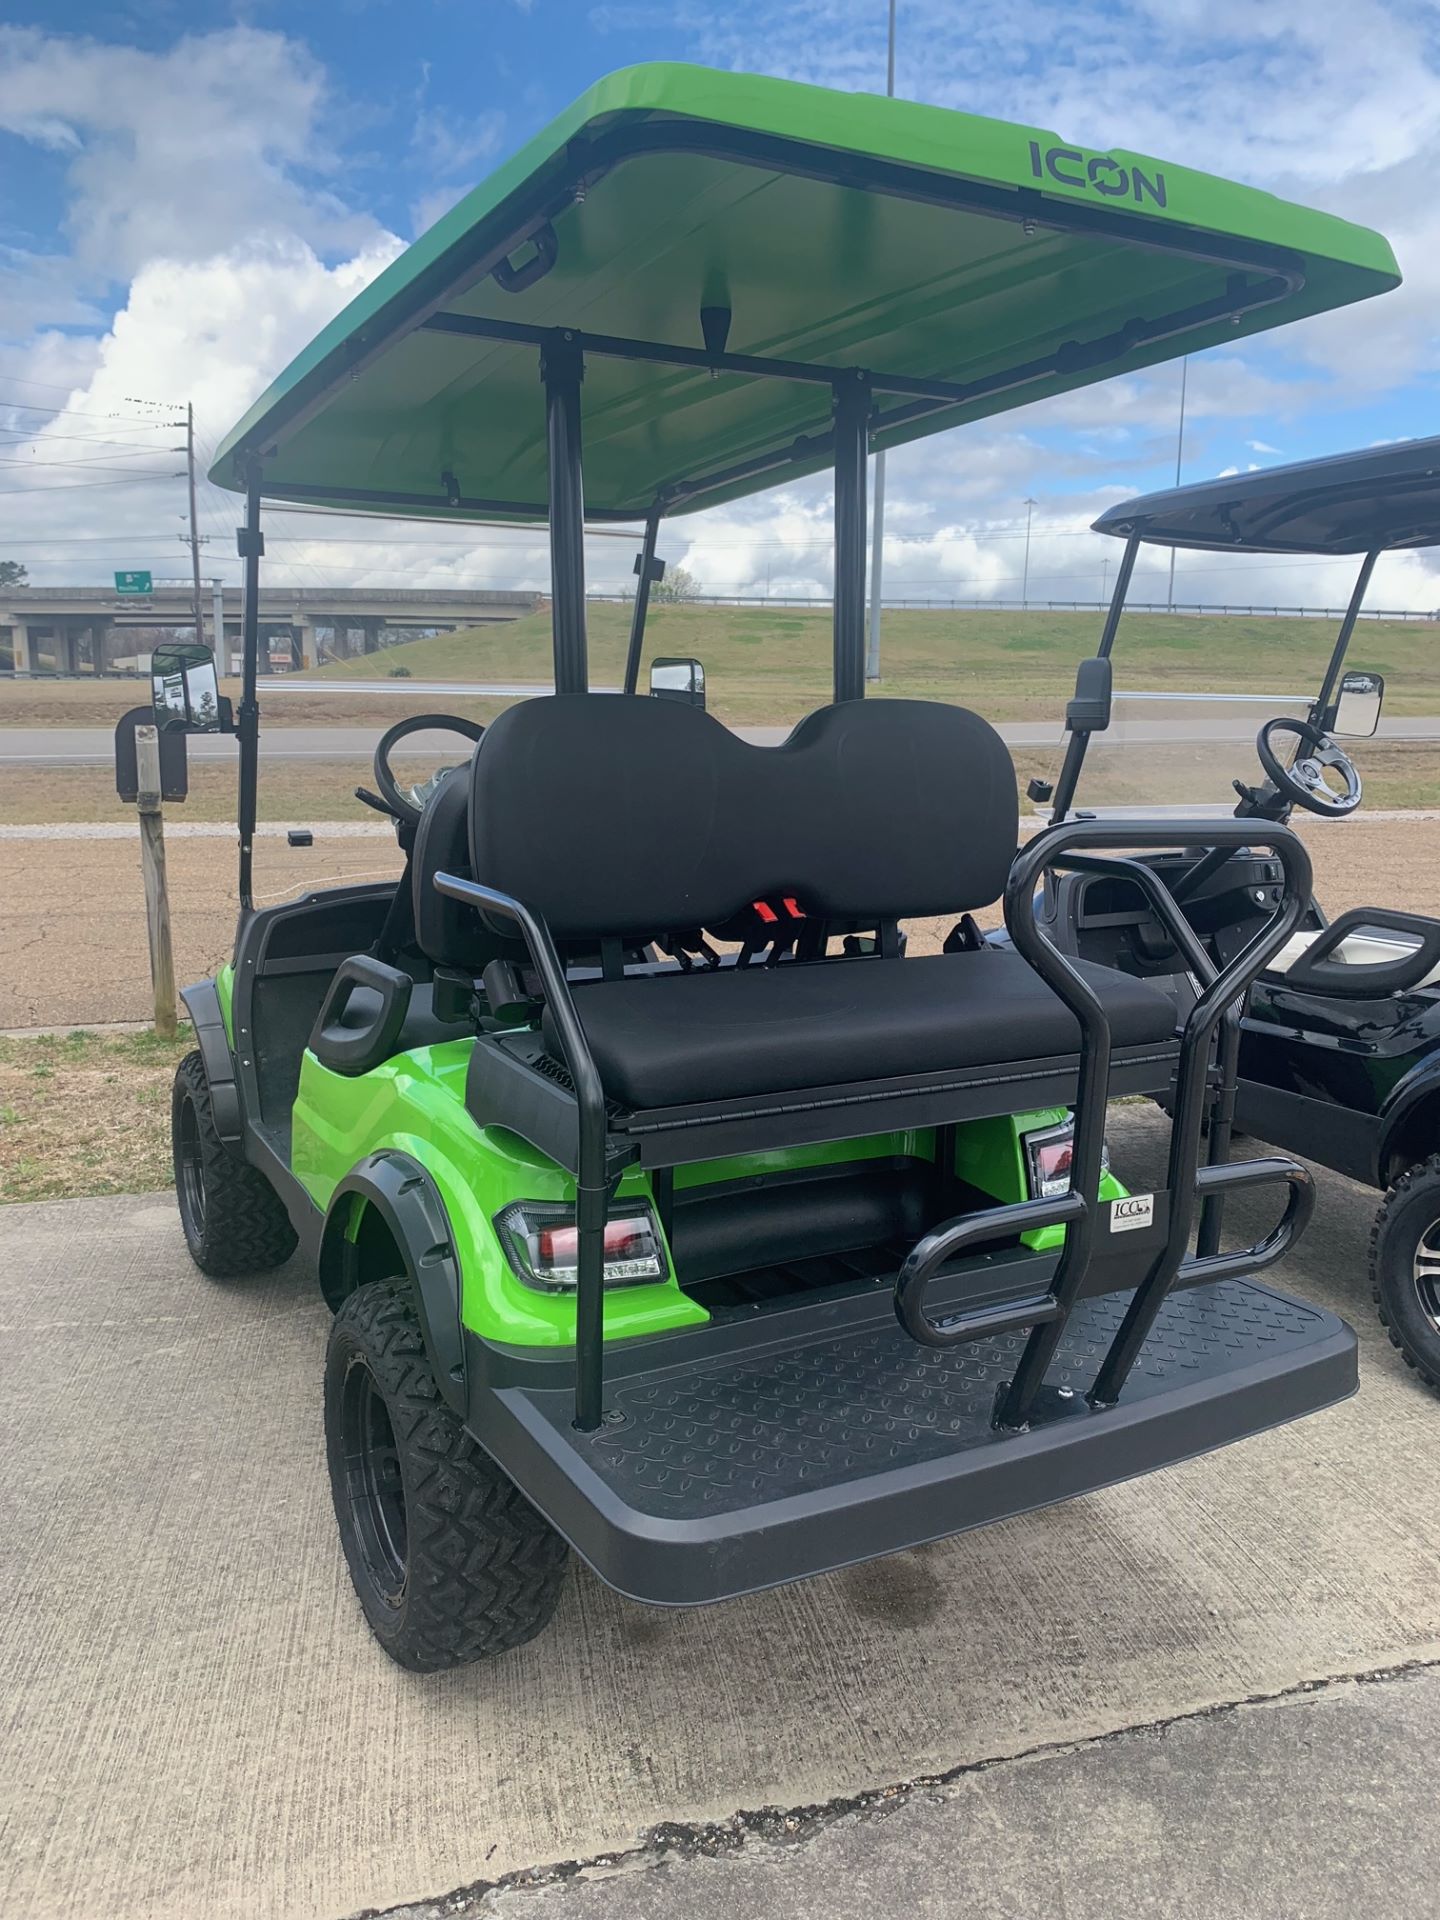 2022 ICON I40L LIME GRN W/TWO TONE SEATS in Decatur, Alabama - Photo 1